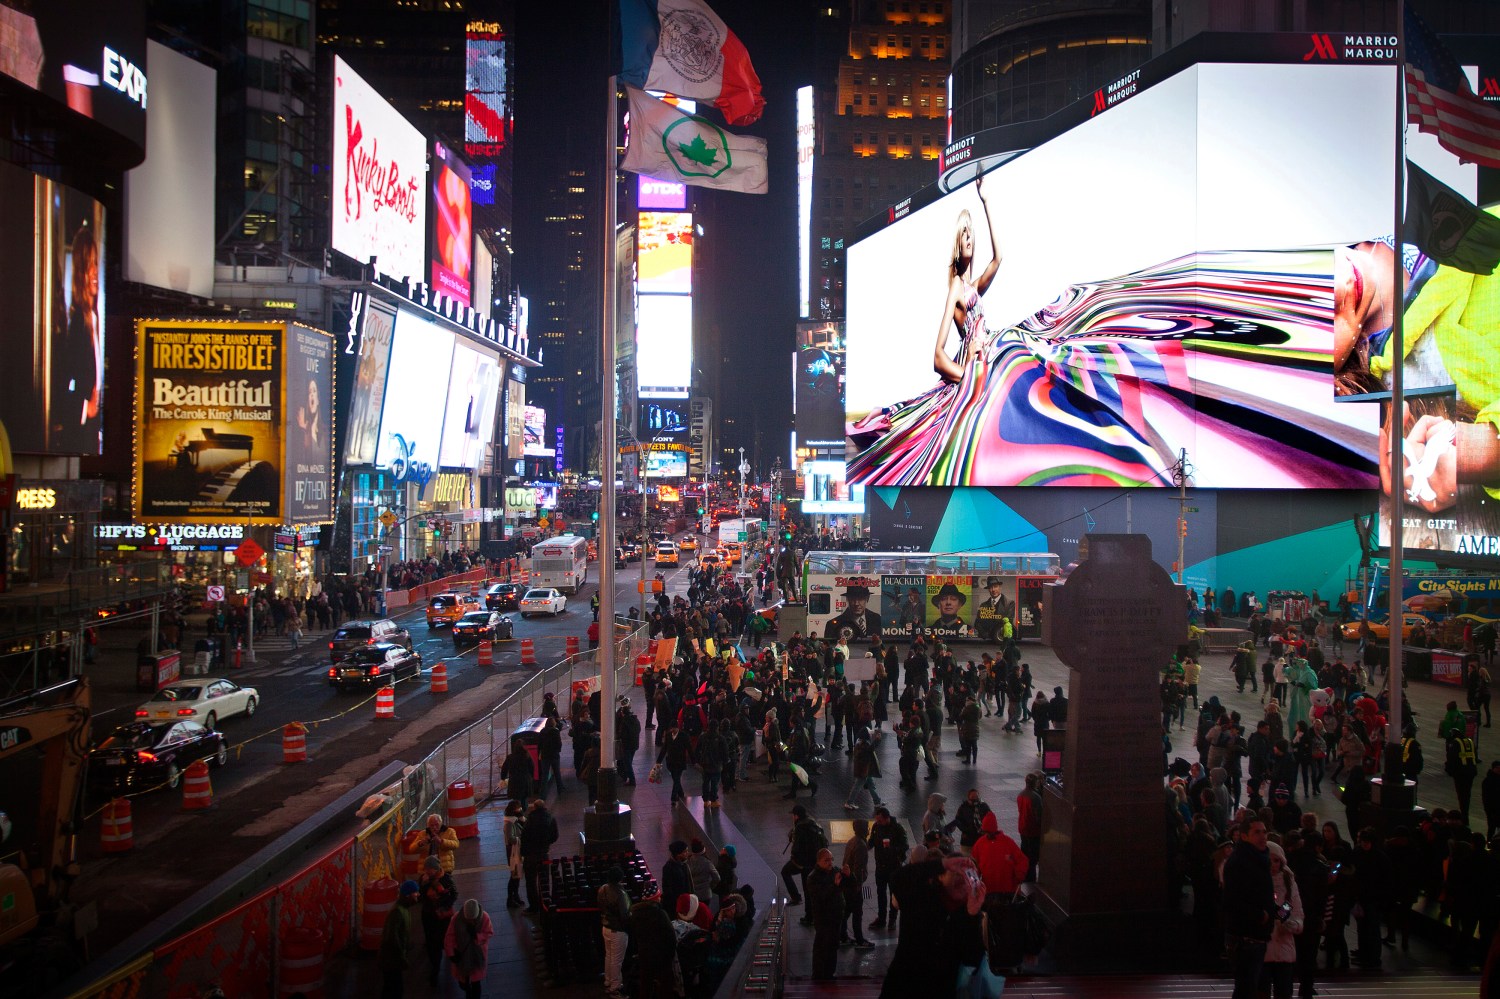 People walk underneath a giant new advertising screen in Times Square, New York, November 20, 2014. The biggest advertising billboard in Times Square history, longer that a football field and eight stories high, which is the world's largest high-definition video display with nearly 24 million LED pixels, lit up for the first time on Tuesday. The rate for a four-week advertising blitz is $2.5 million, according to the New York Times.